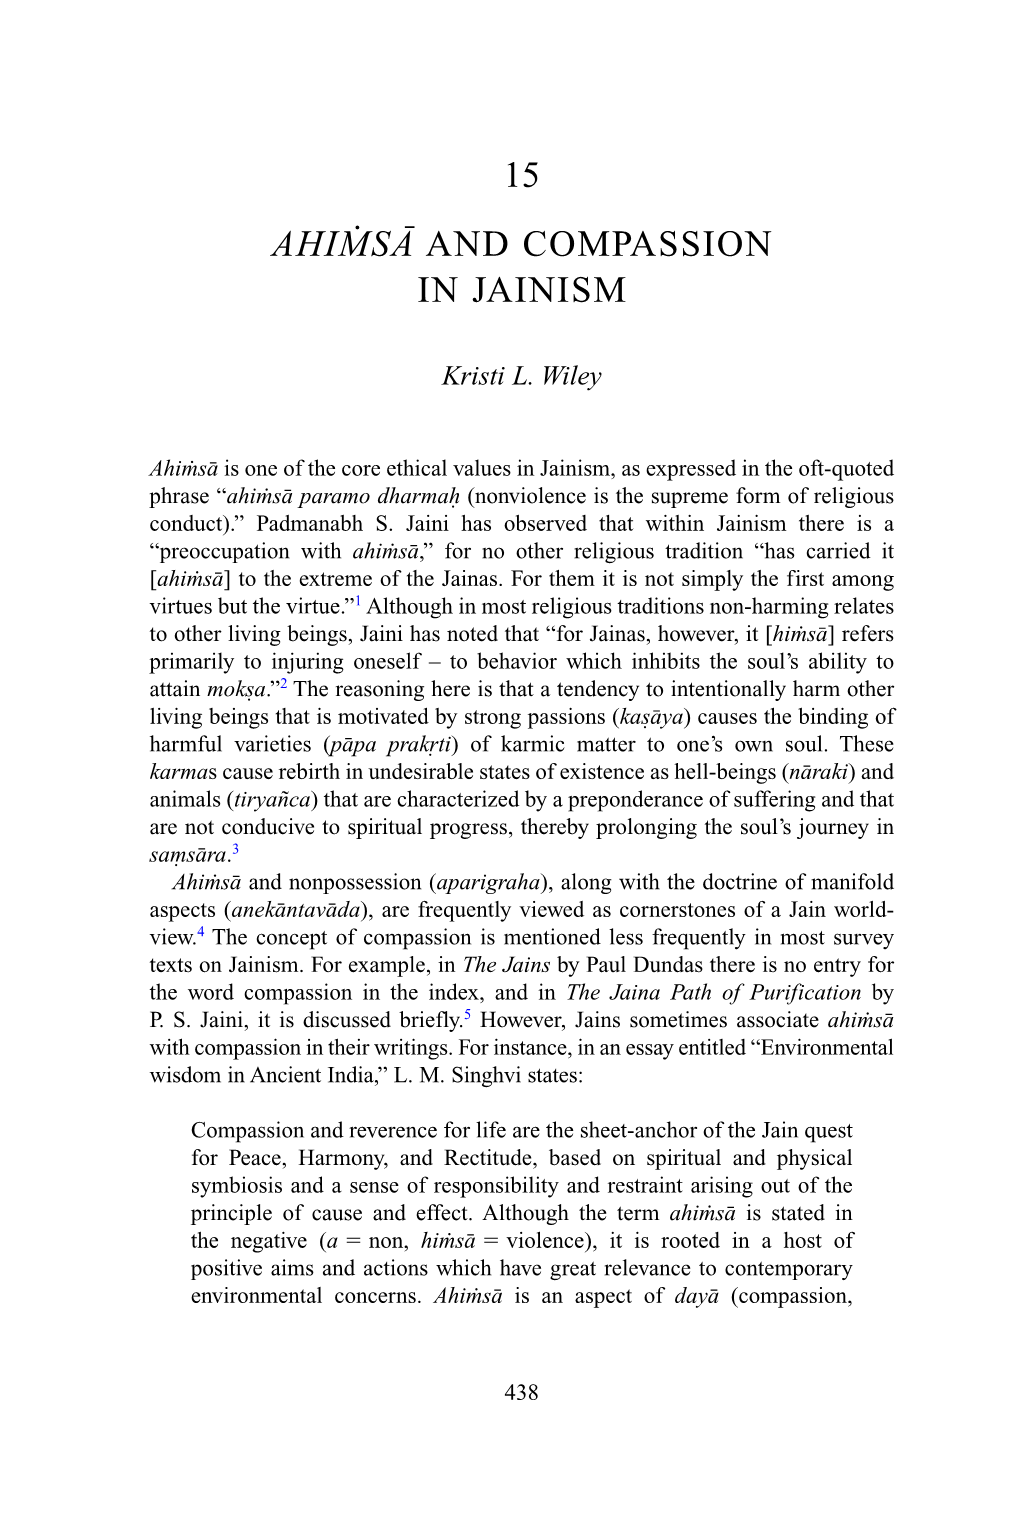 Ahiysa and Compassion in Jainism